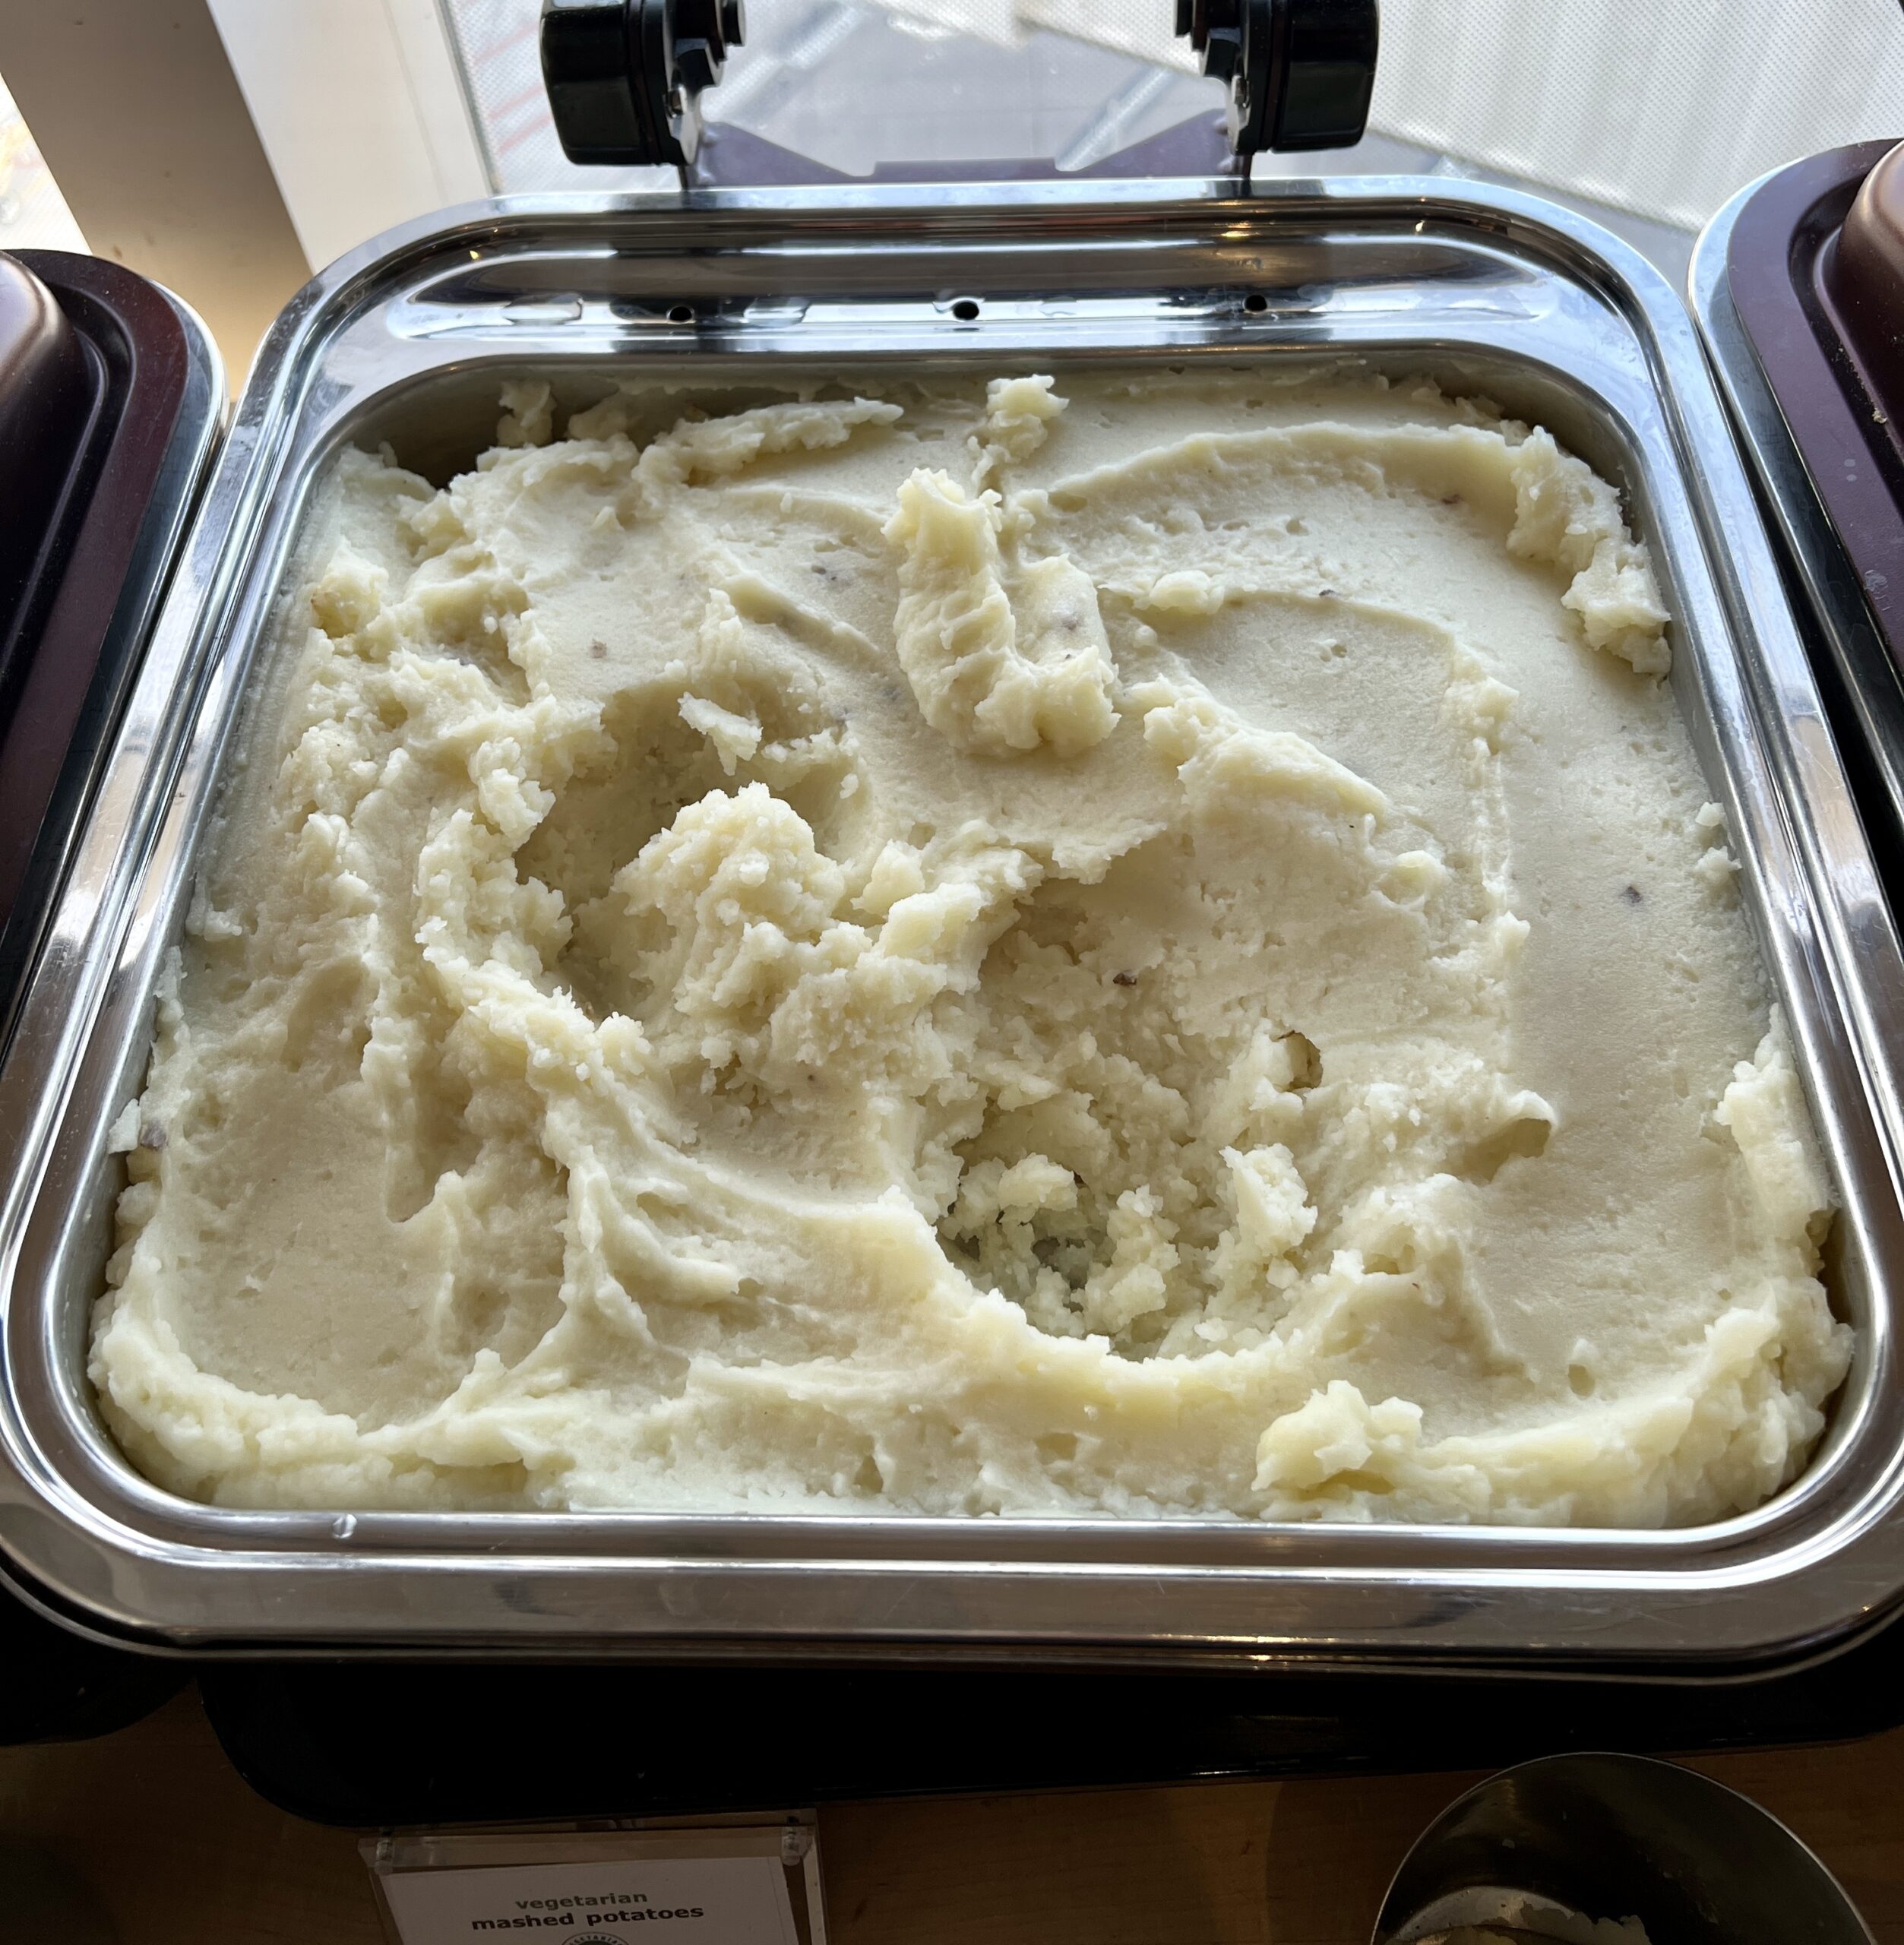 DTW Sky Club A68 Mashed Potatoes